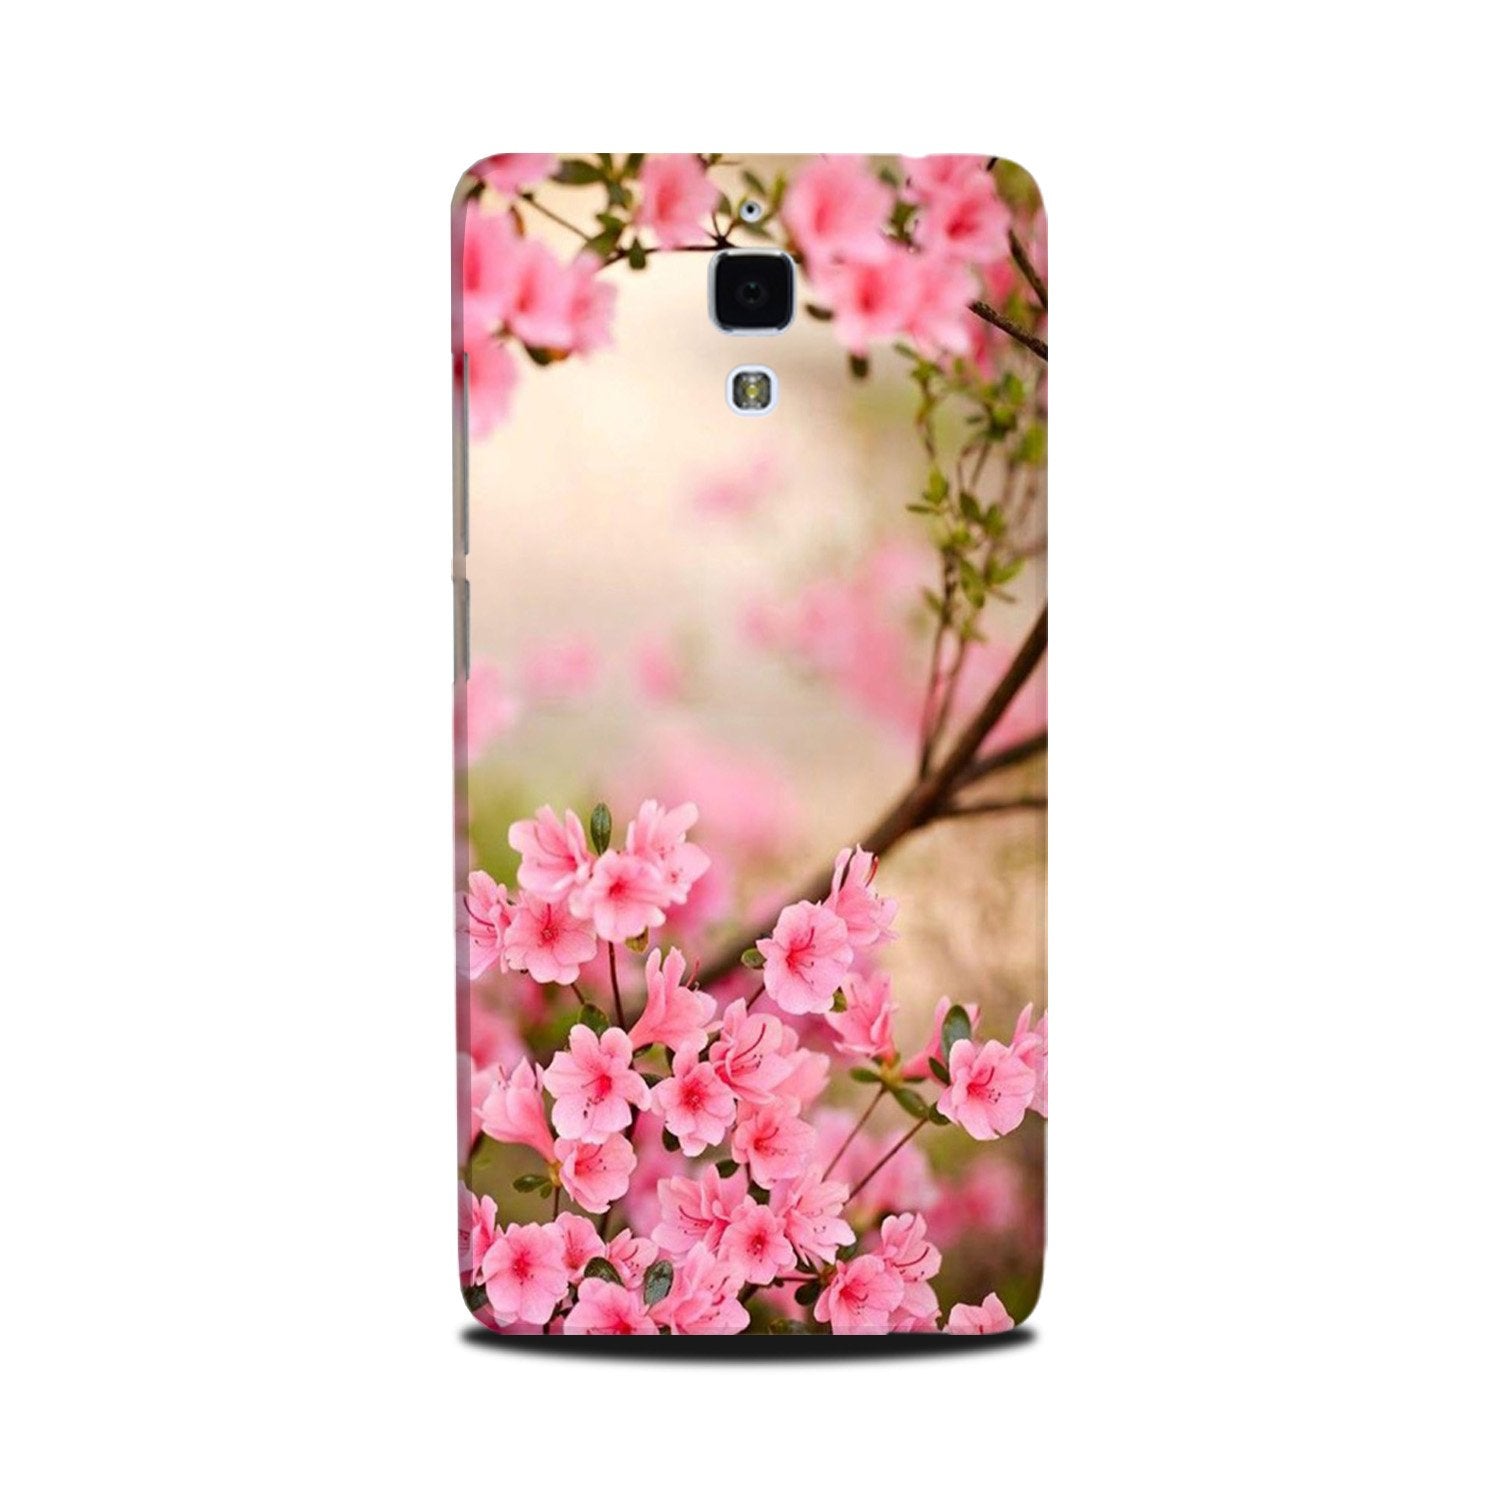 Pink flowers Case for Mi 4